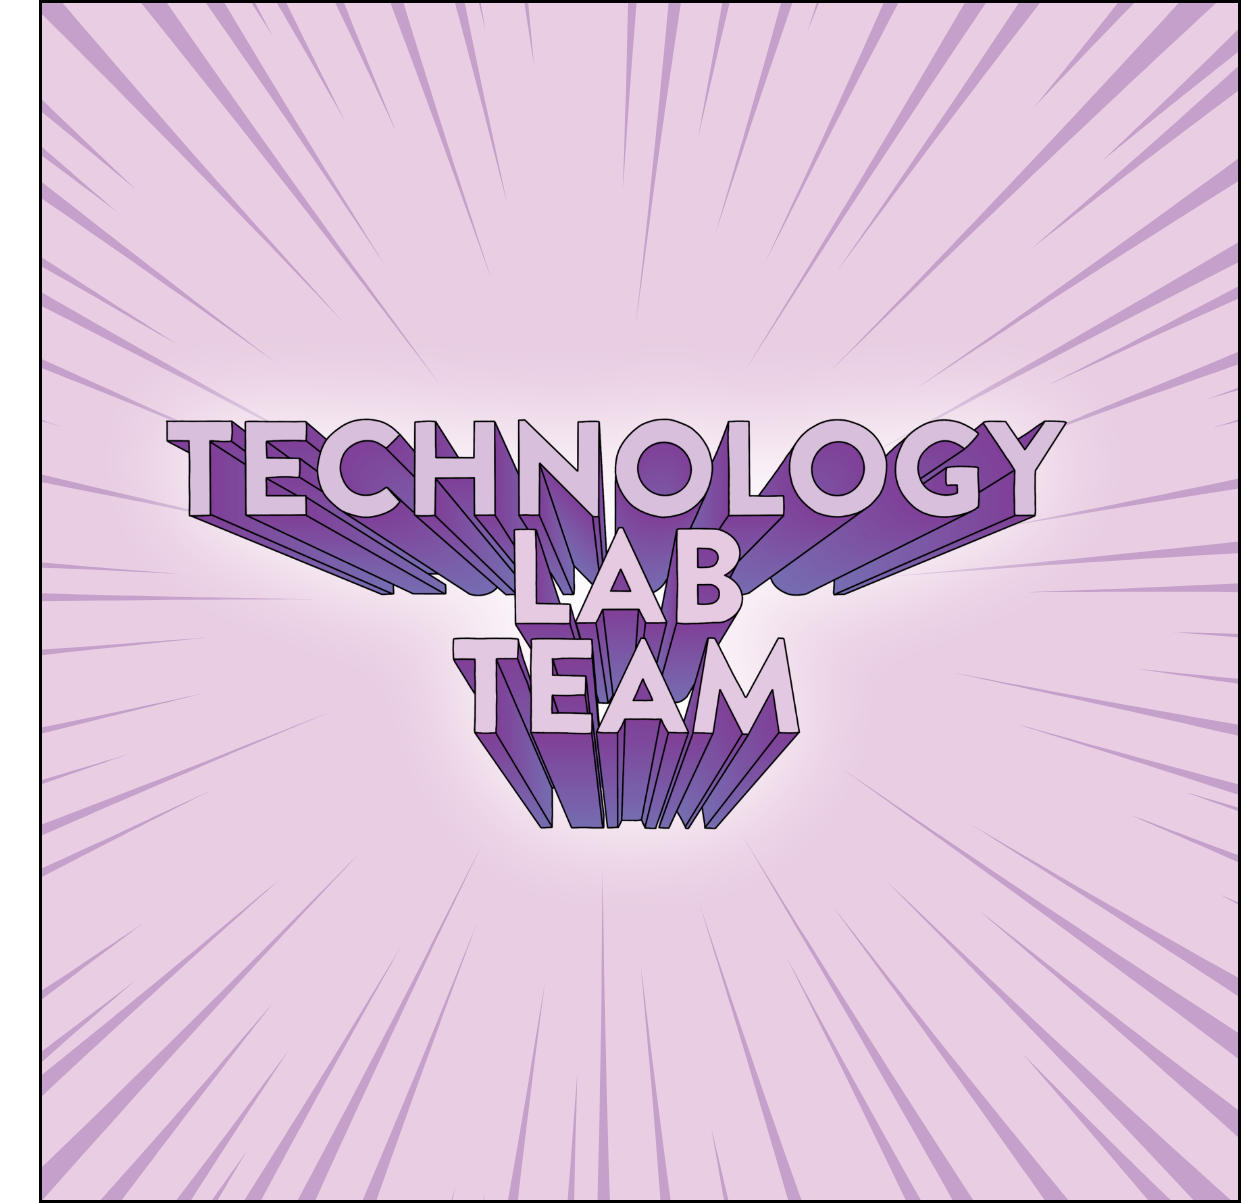 "Who we are. We are a pathfinder team with the goal of testing a variety of ideas, concepts, and approaches through deliberate experimentation and the development of technical innovative solutions to support various learning opportunities across the public service."